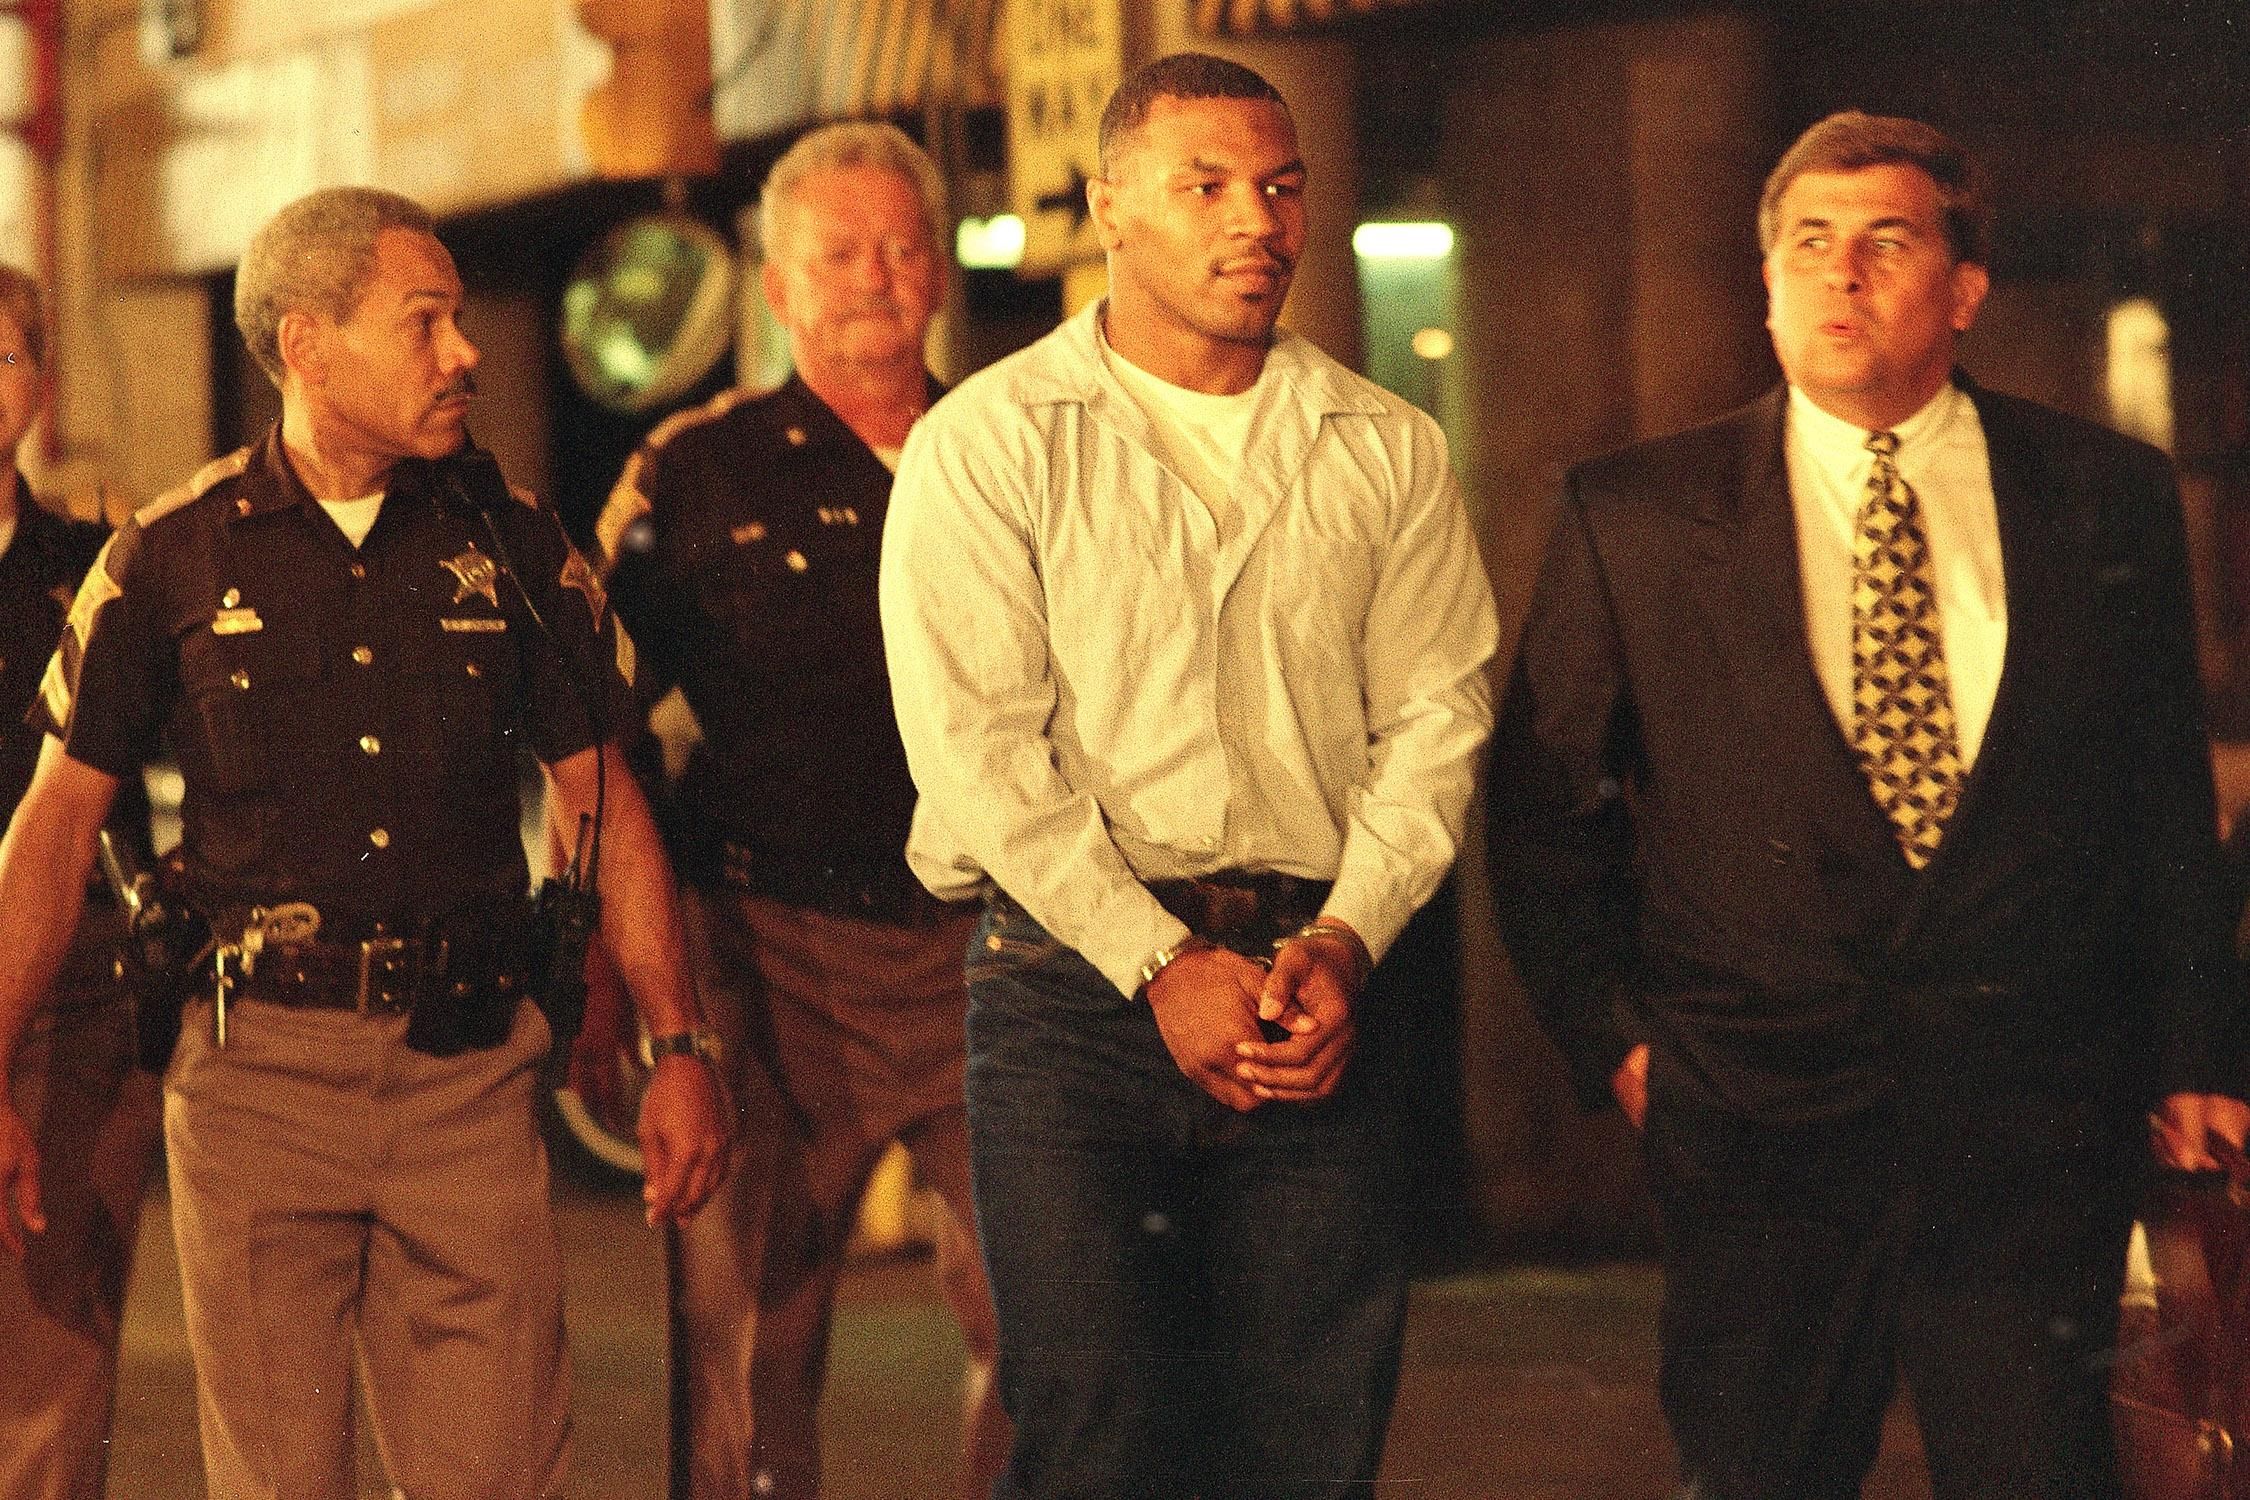 Mike Tyson being lead by police in his 1992 arrest